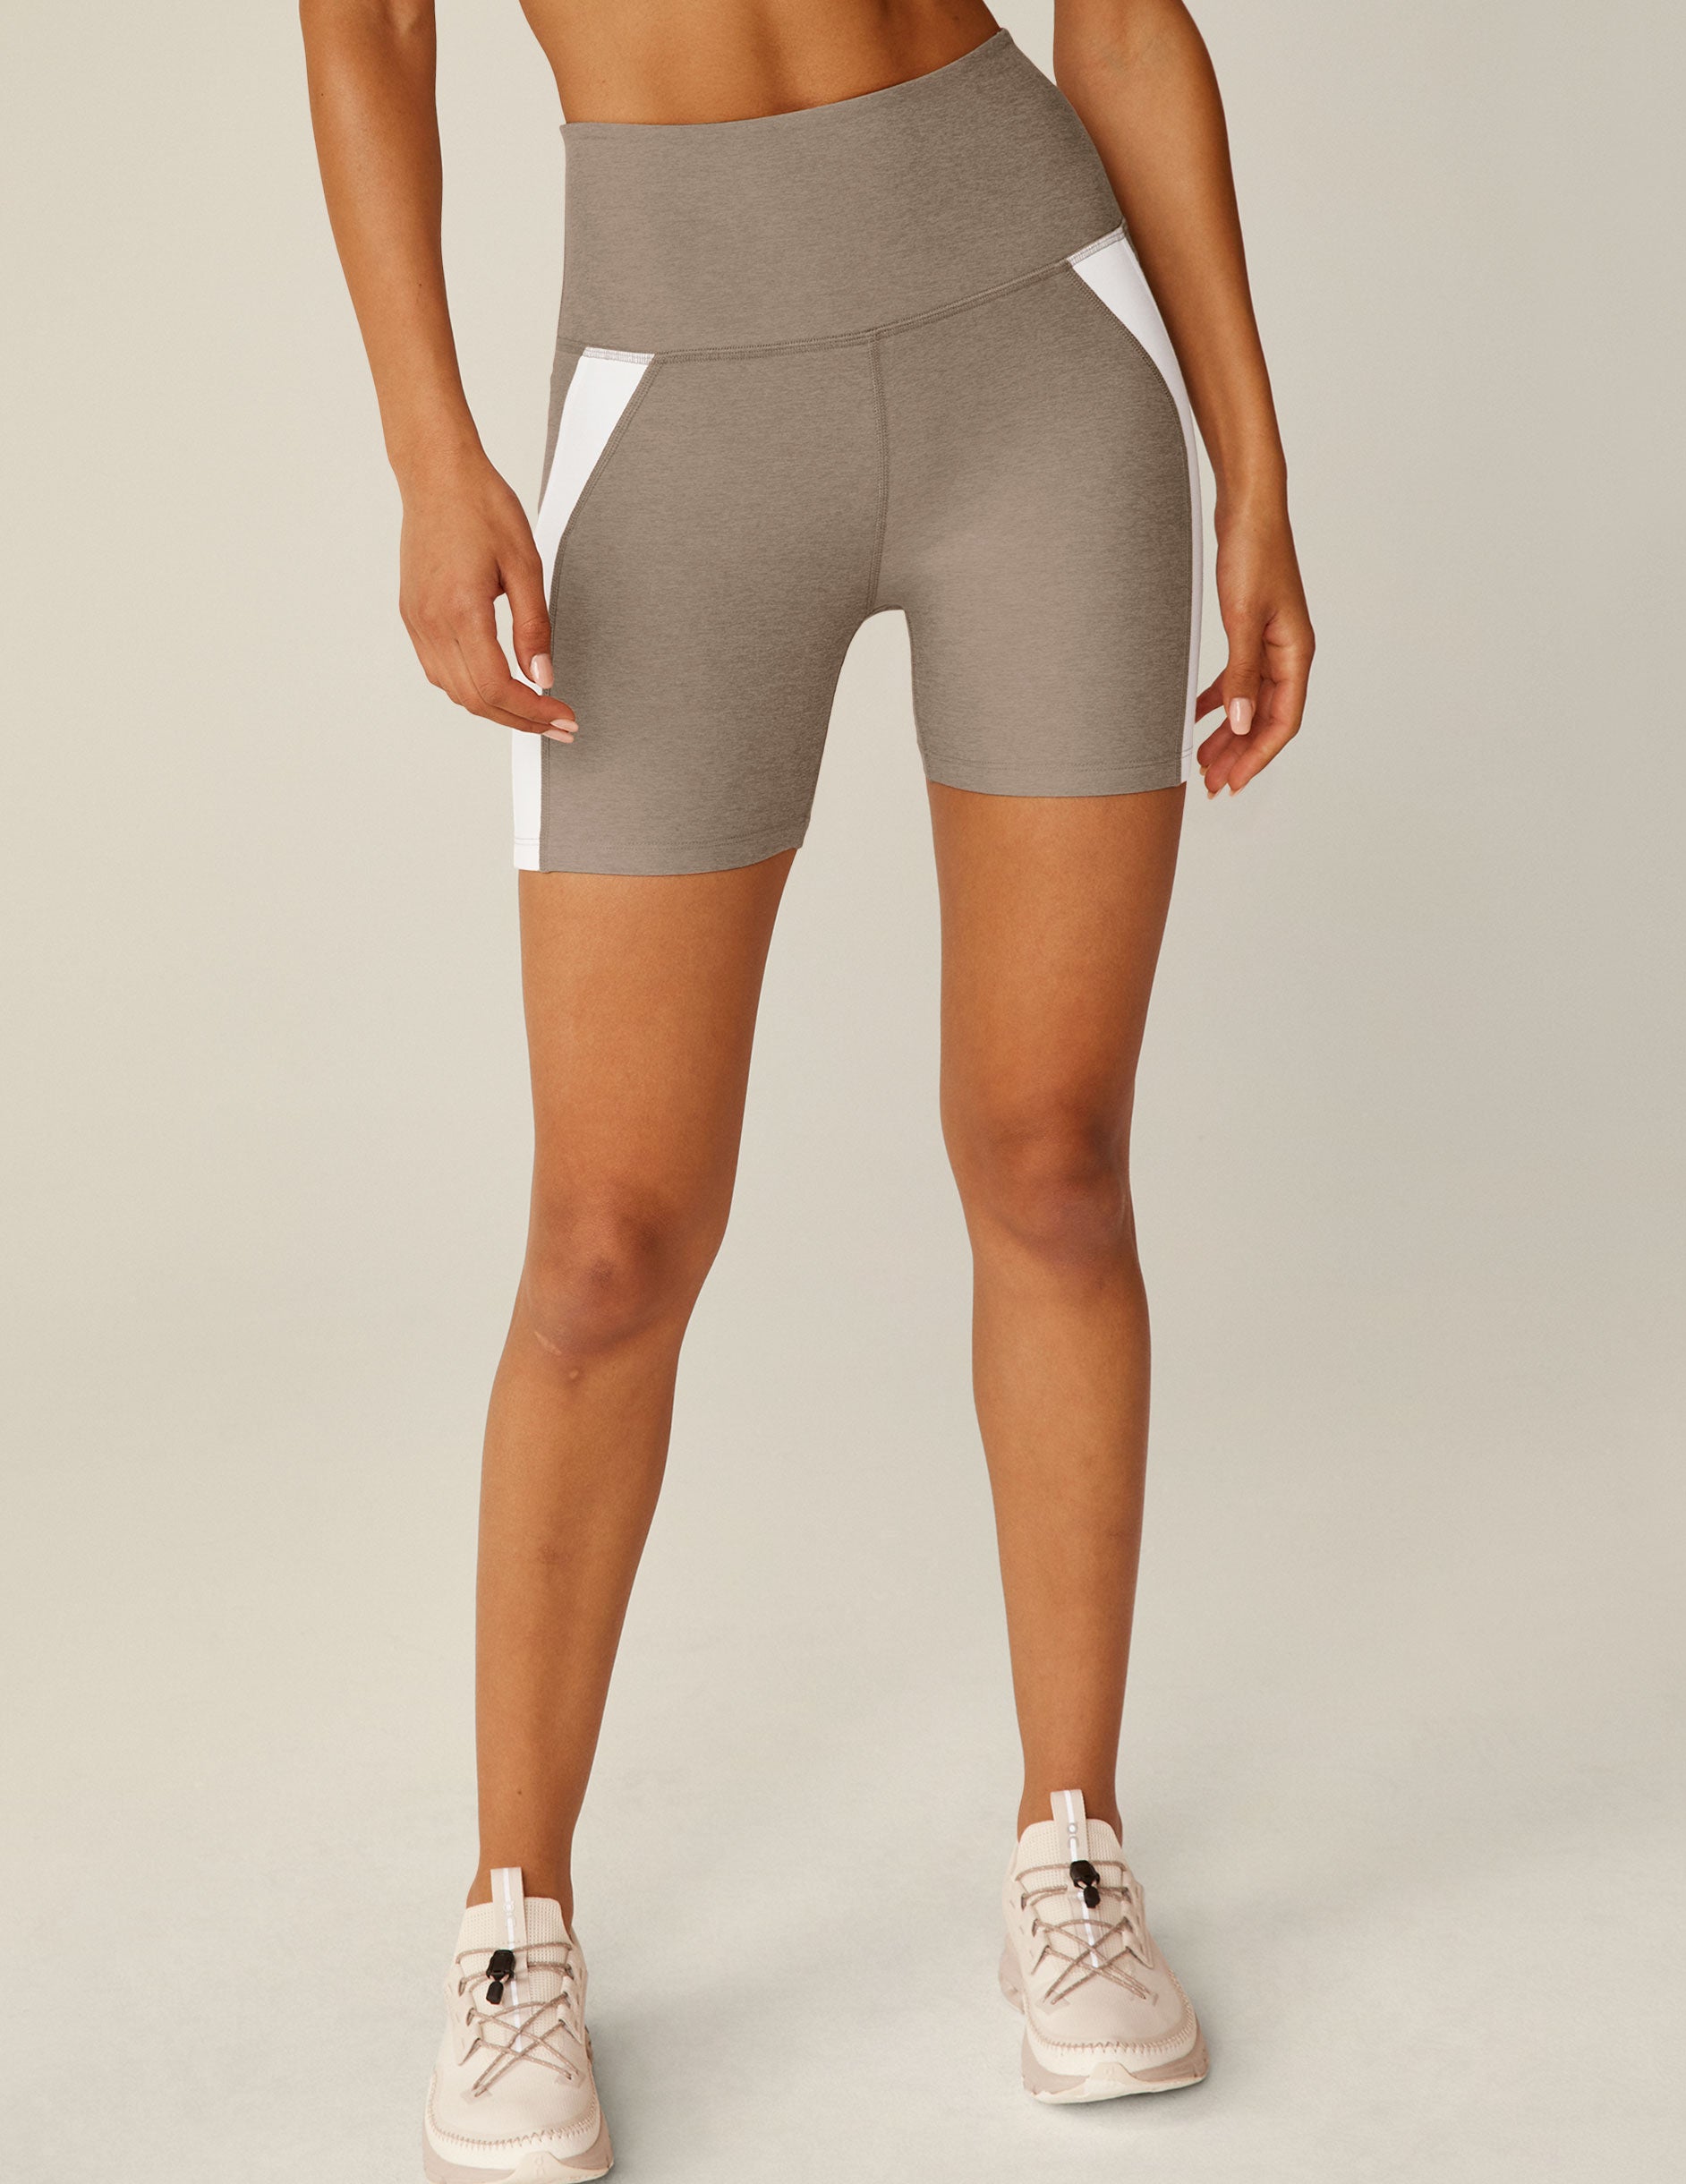 brown high-waisted biker shorts with white lining on the sides. 